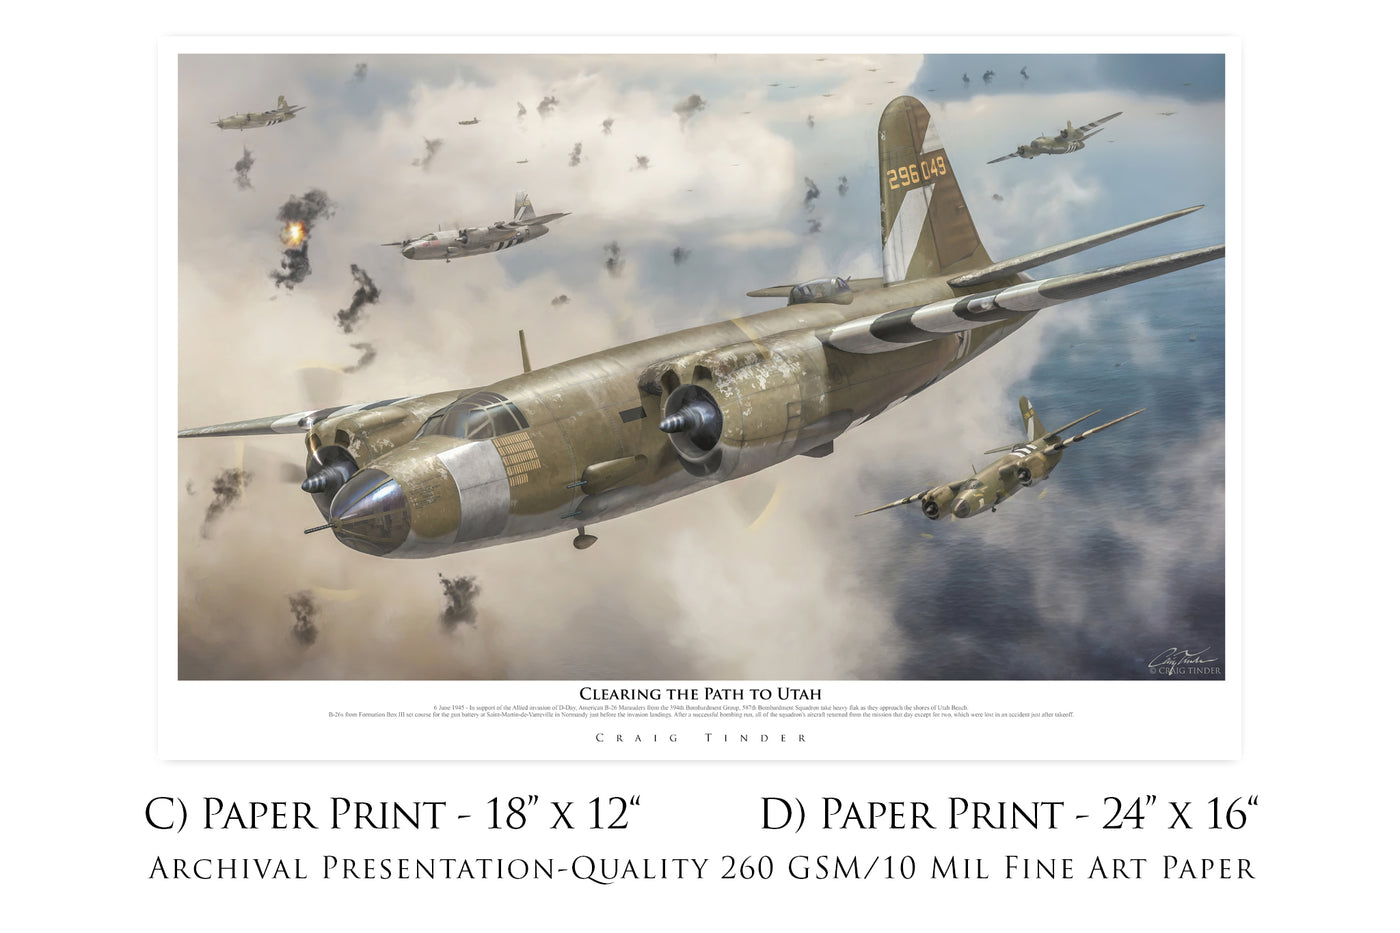 Clearing the Path to Utah - B-26 Marauder Aviation Art-Art Print-Aces In Action: The Workshop of Artist Craig Tinder